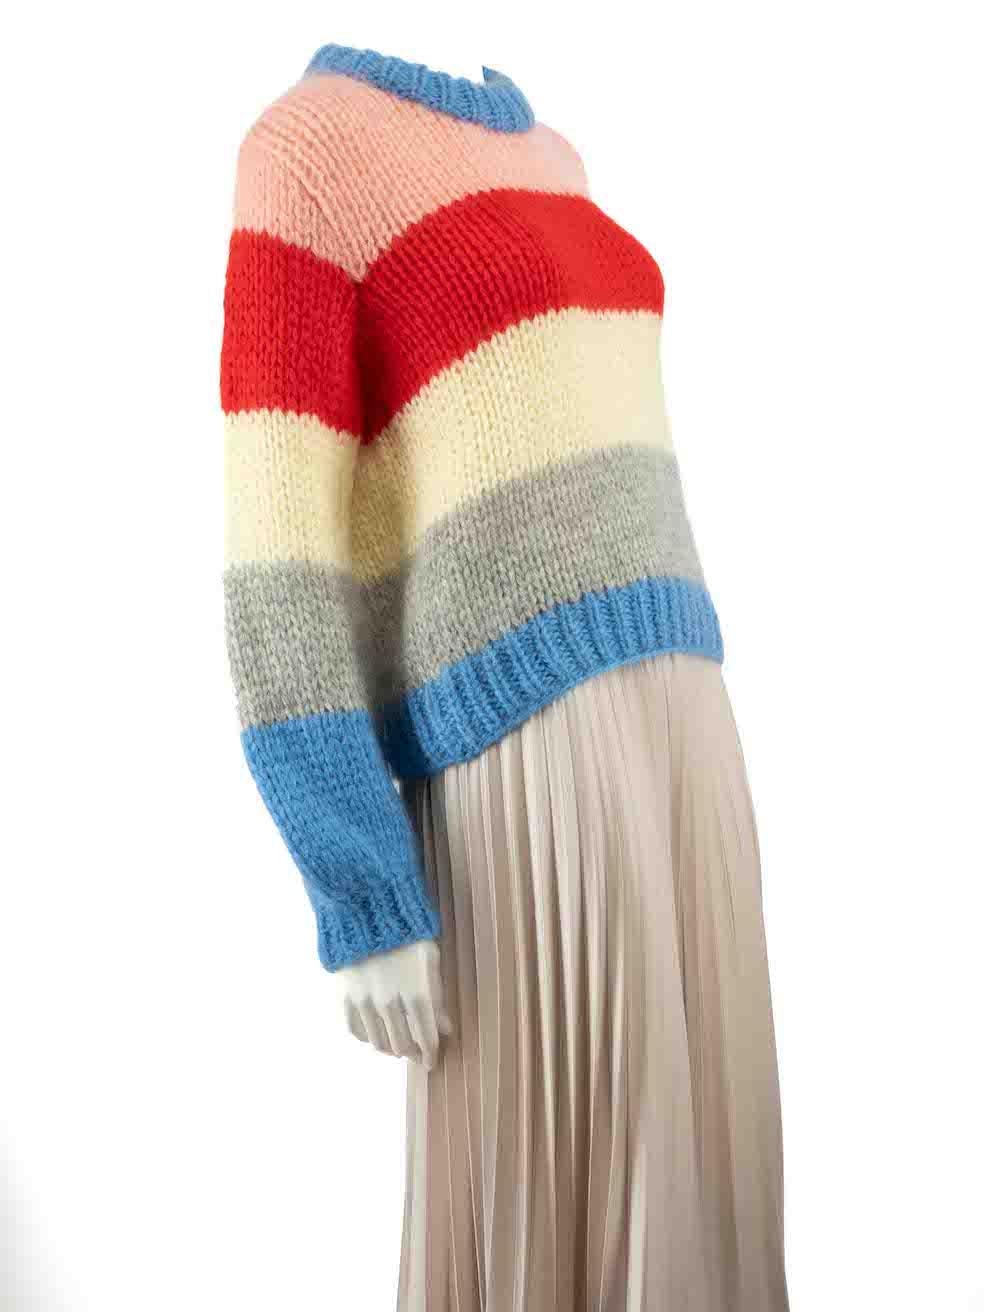 CONDITION is Very good. Hardly any visible wear to jumper is evident on this used Ganni designer resale item.
 
 
 
 Details
 
 
 Multicolour- blue, pink, red, yellow, grey
 
 Wool
 
 Knit jumper
 
 Striped pattern
 
 Long sleeves
 
 Round neck
 
 
